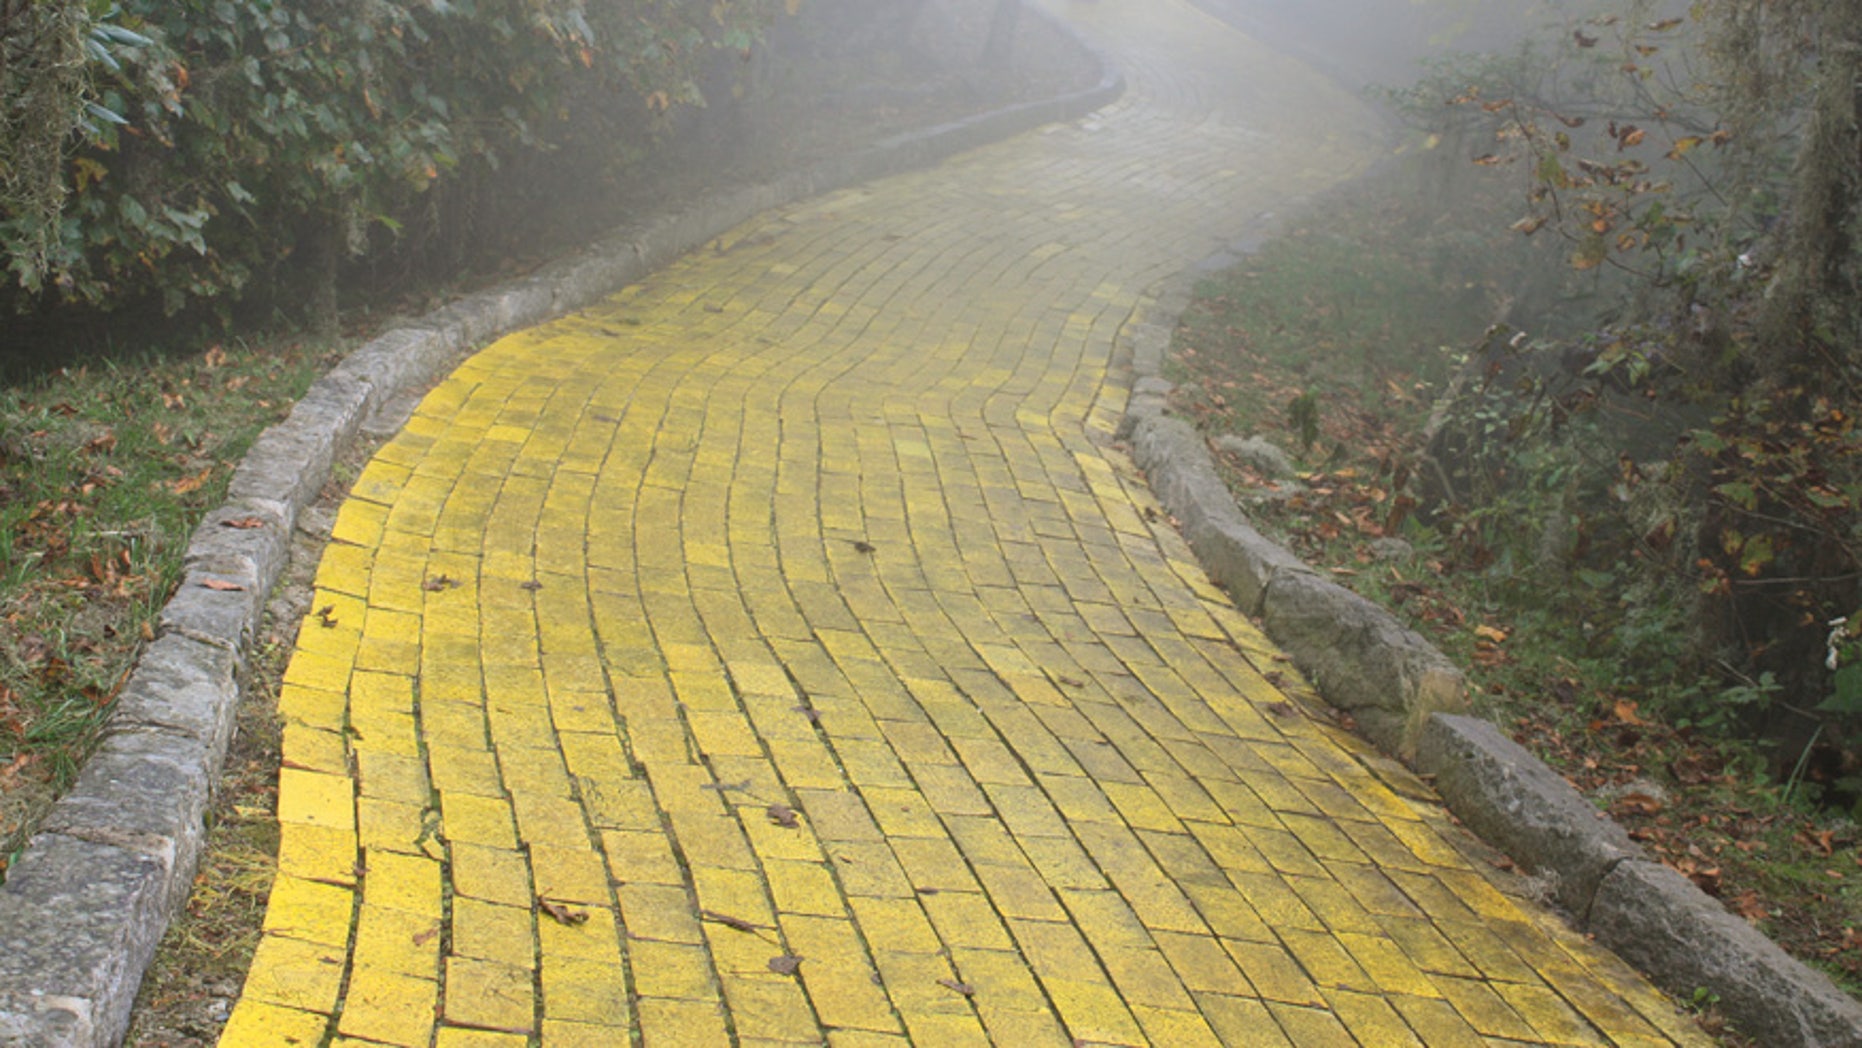 Eerie 'Land of Oz' theme park in North Carolina finally opening up for